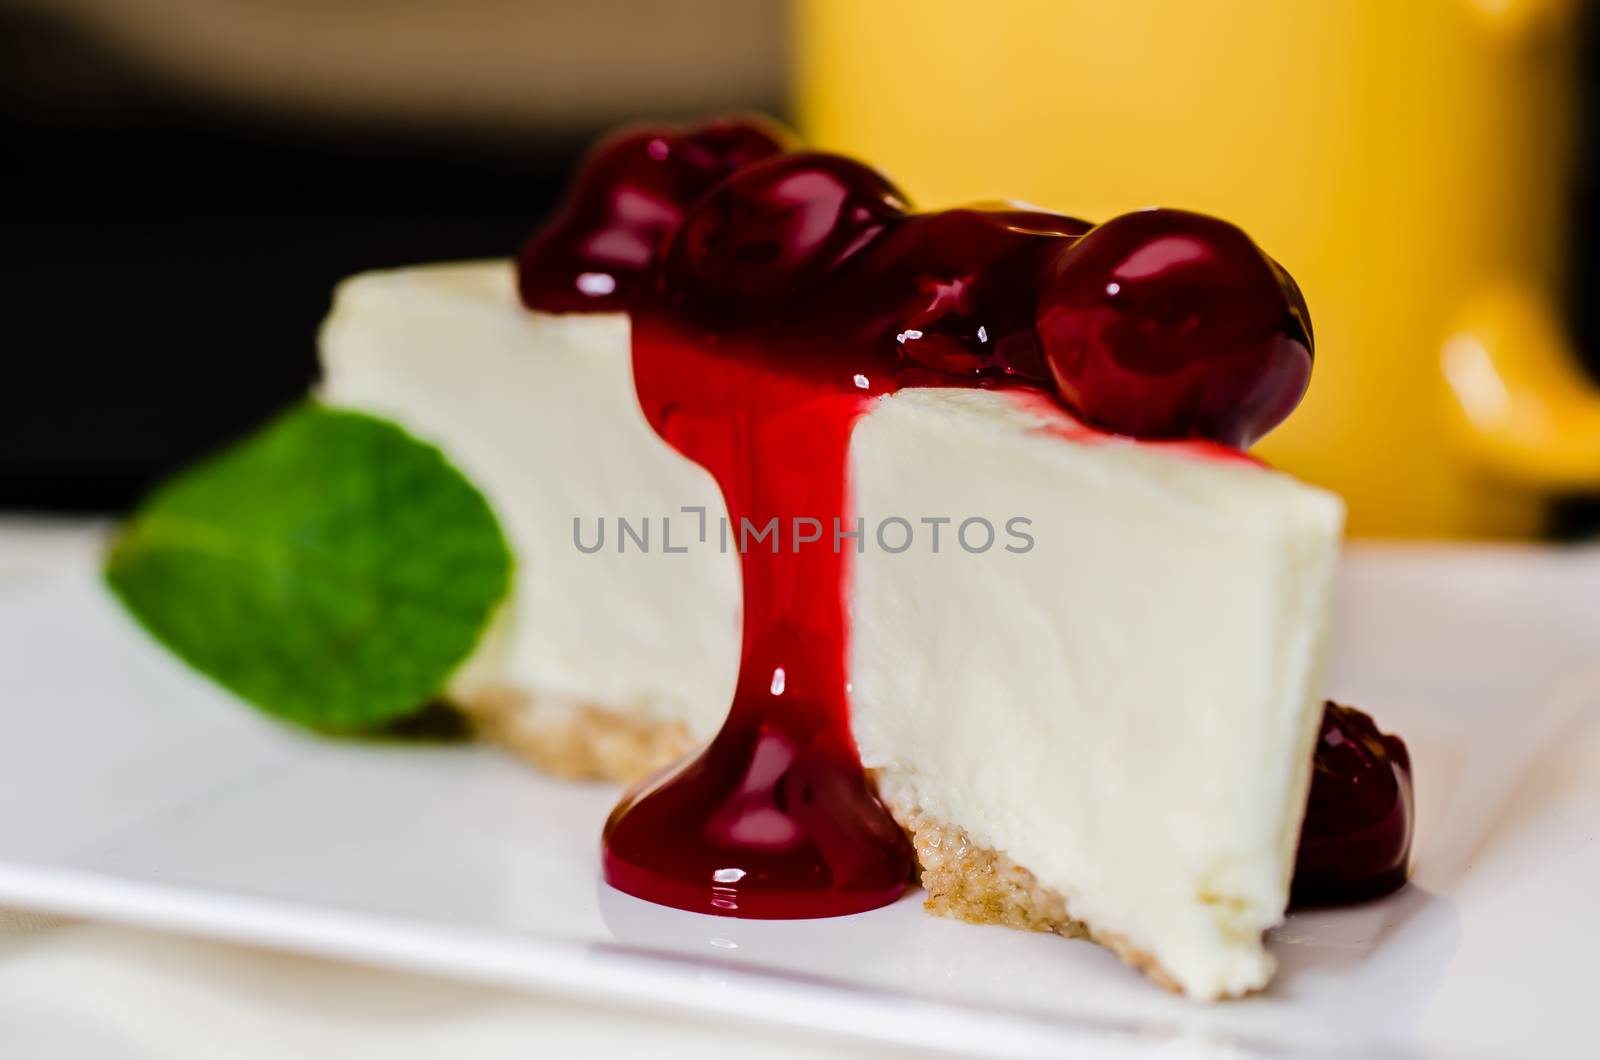 Slice of cherry cheesecake and coffee with mint garnish.   Shallow depth of field.  